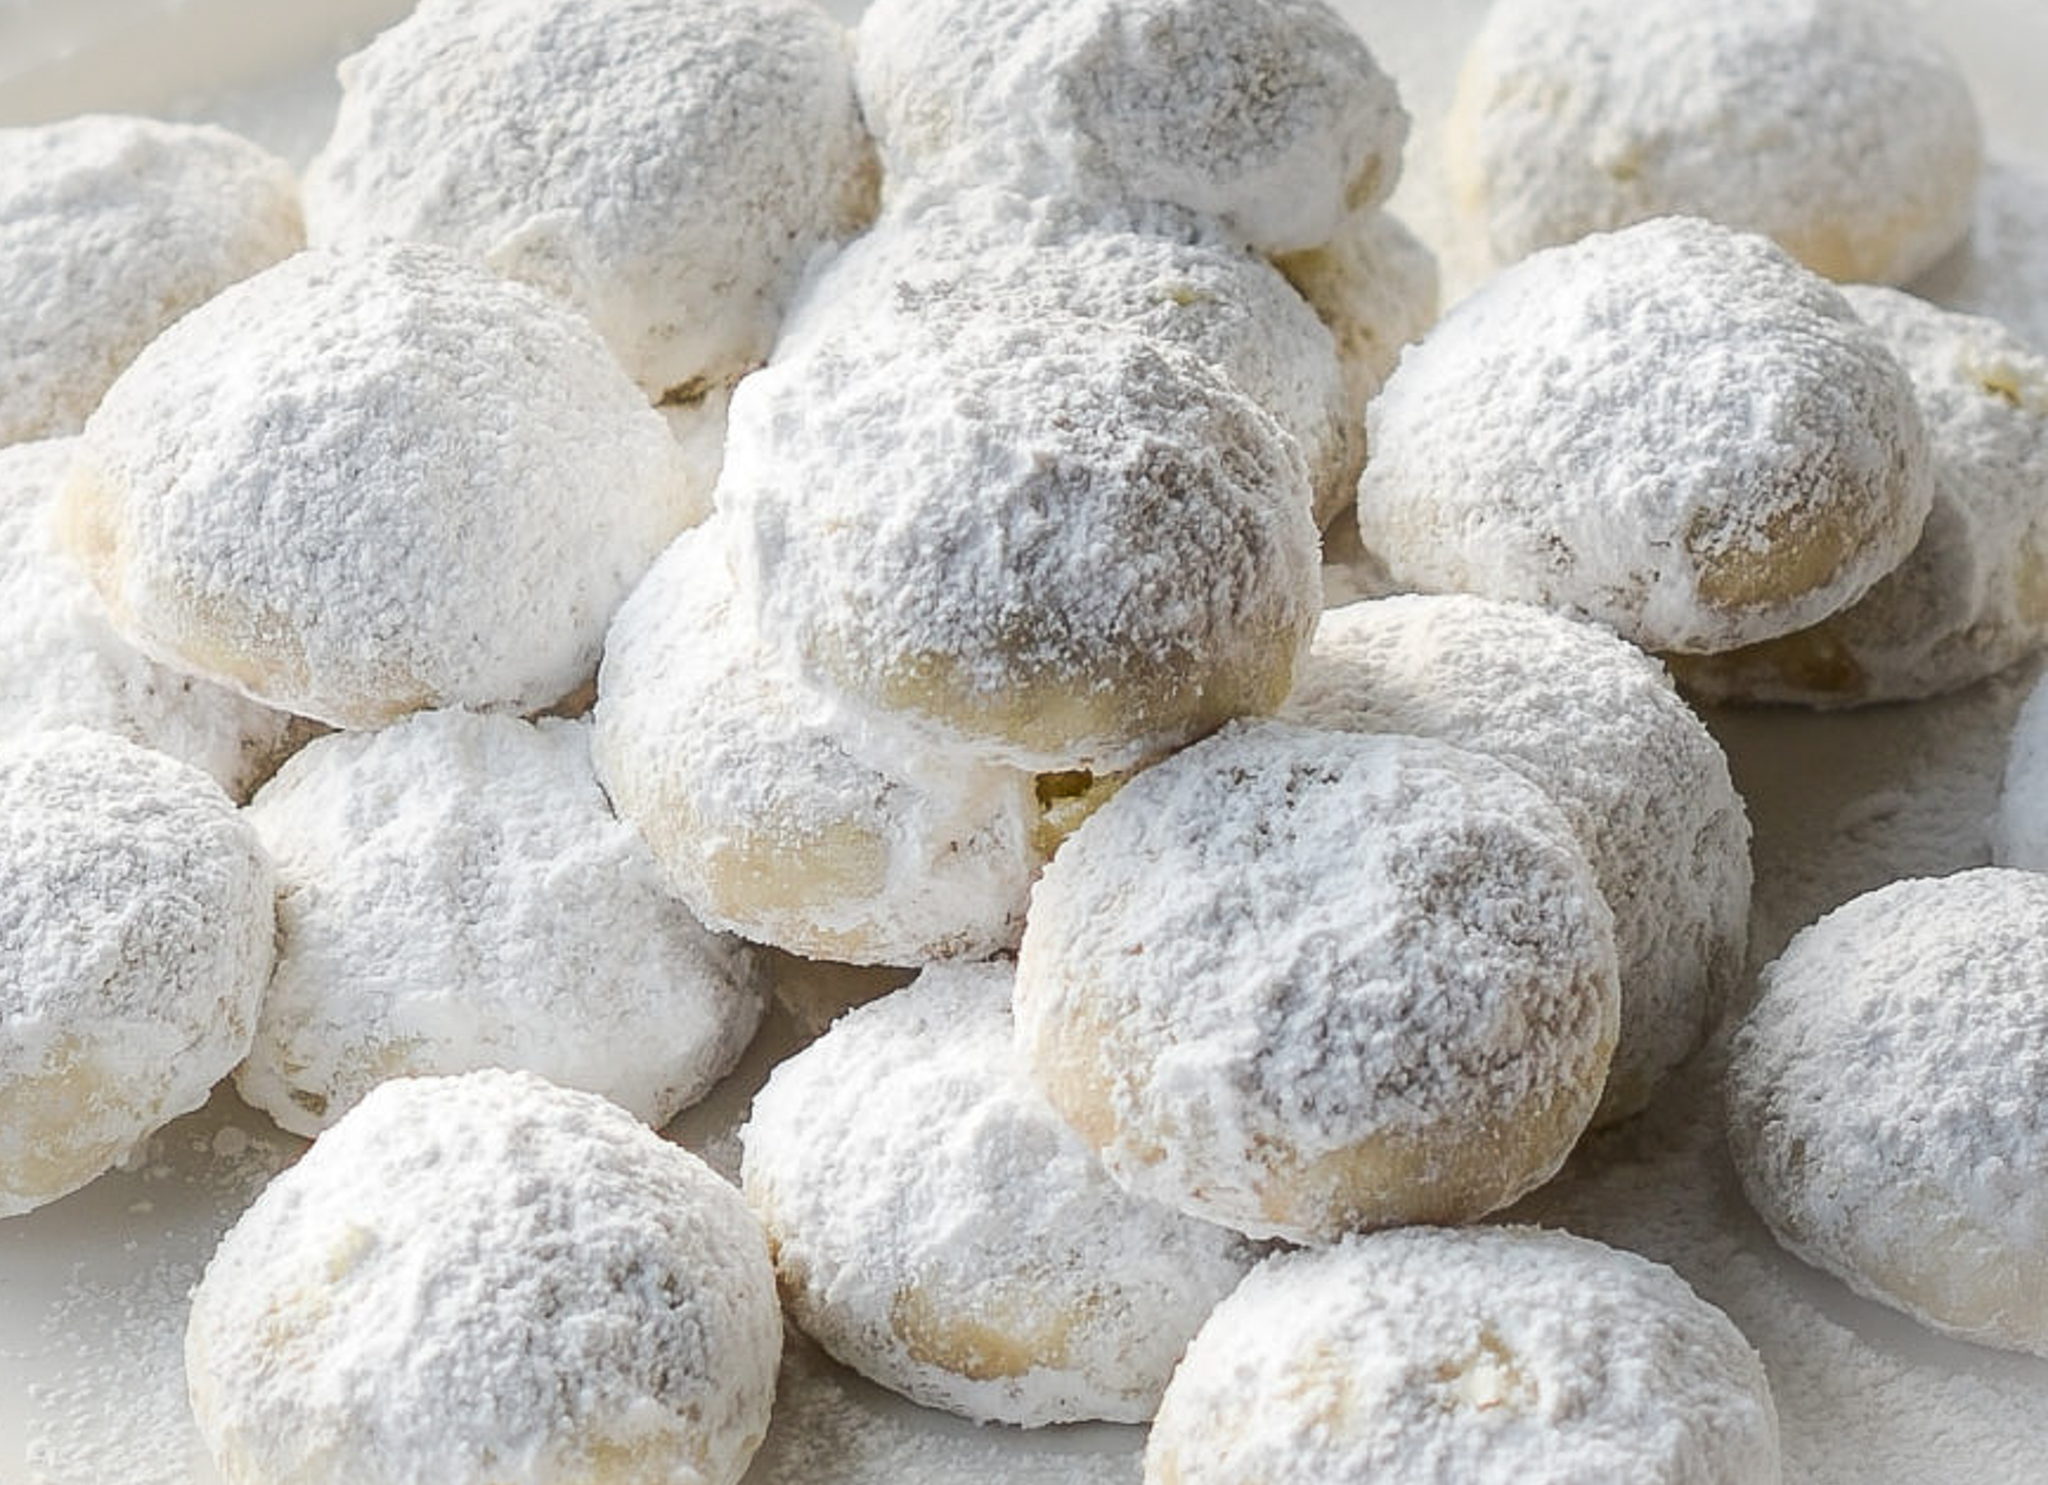 https://www.onceuponachef.com/images/2019/04/mexican-wedding-cookies-with-coconut-and-lime.jpg